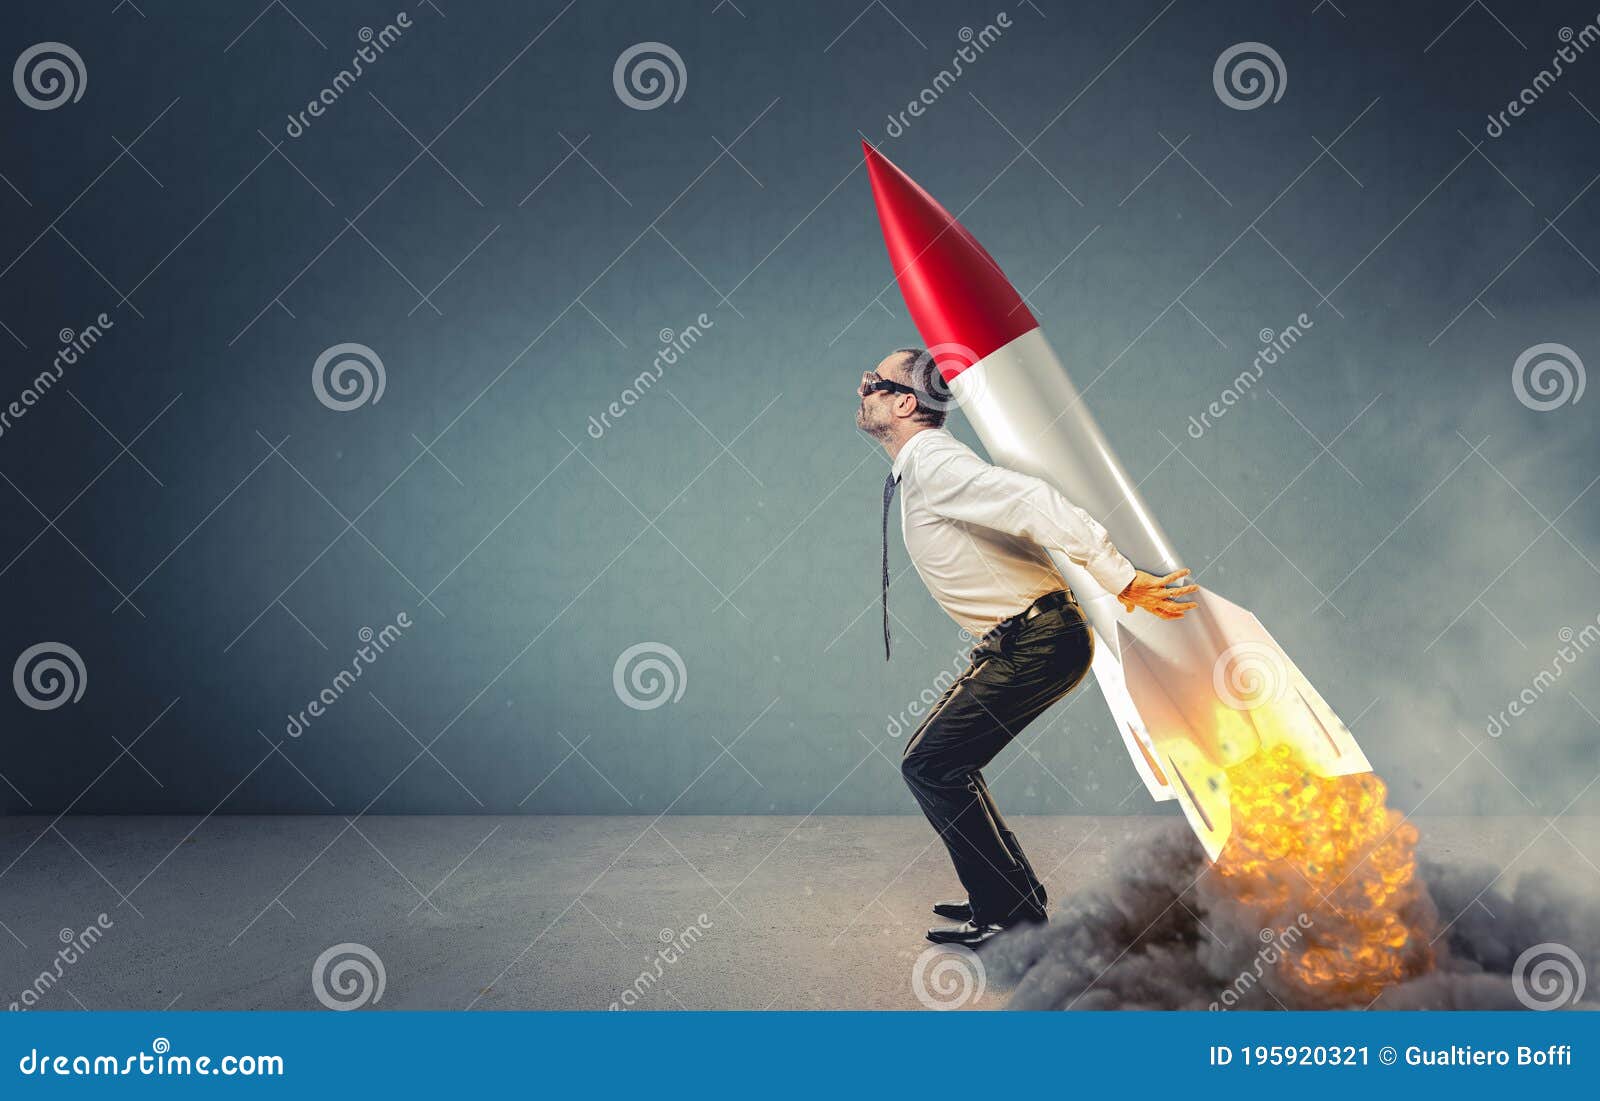 businessman with rocket on his back ready to take off